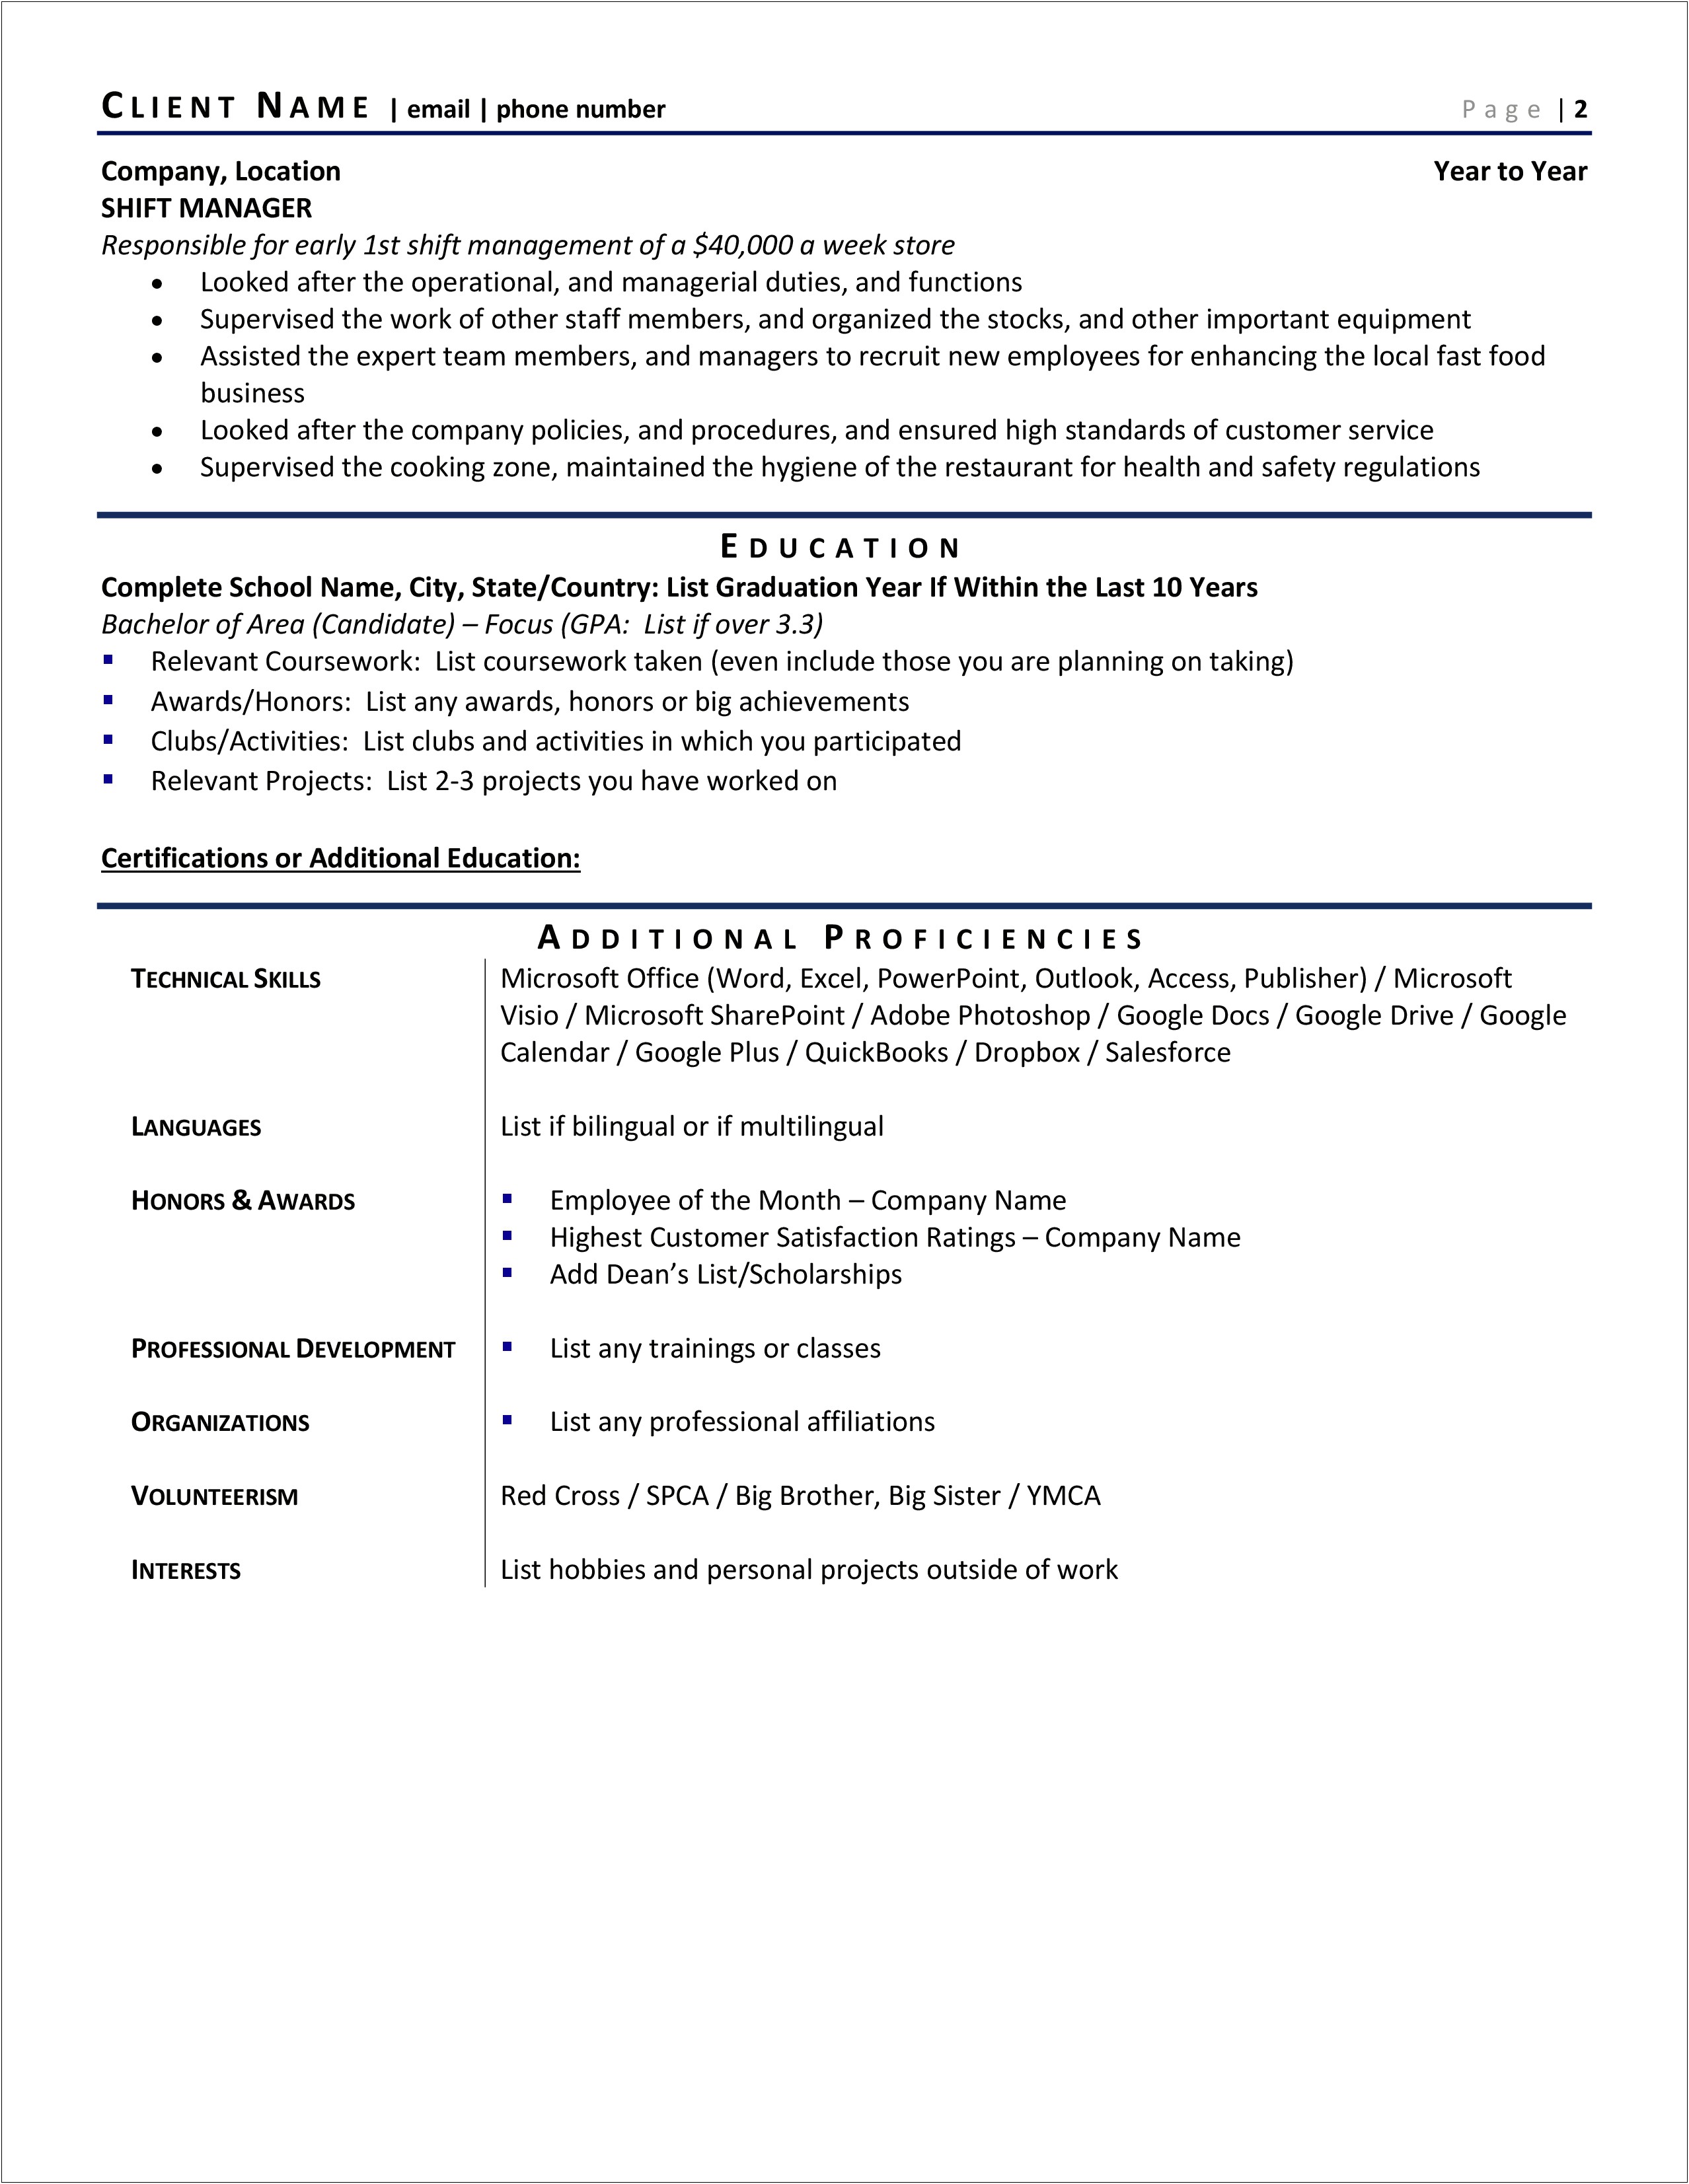 Listing Multiple Jobs On Resume In A Year